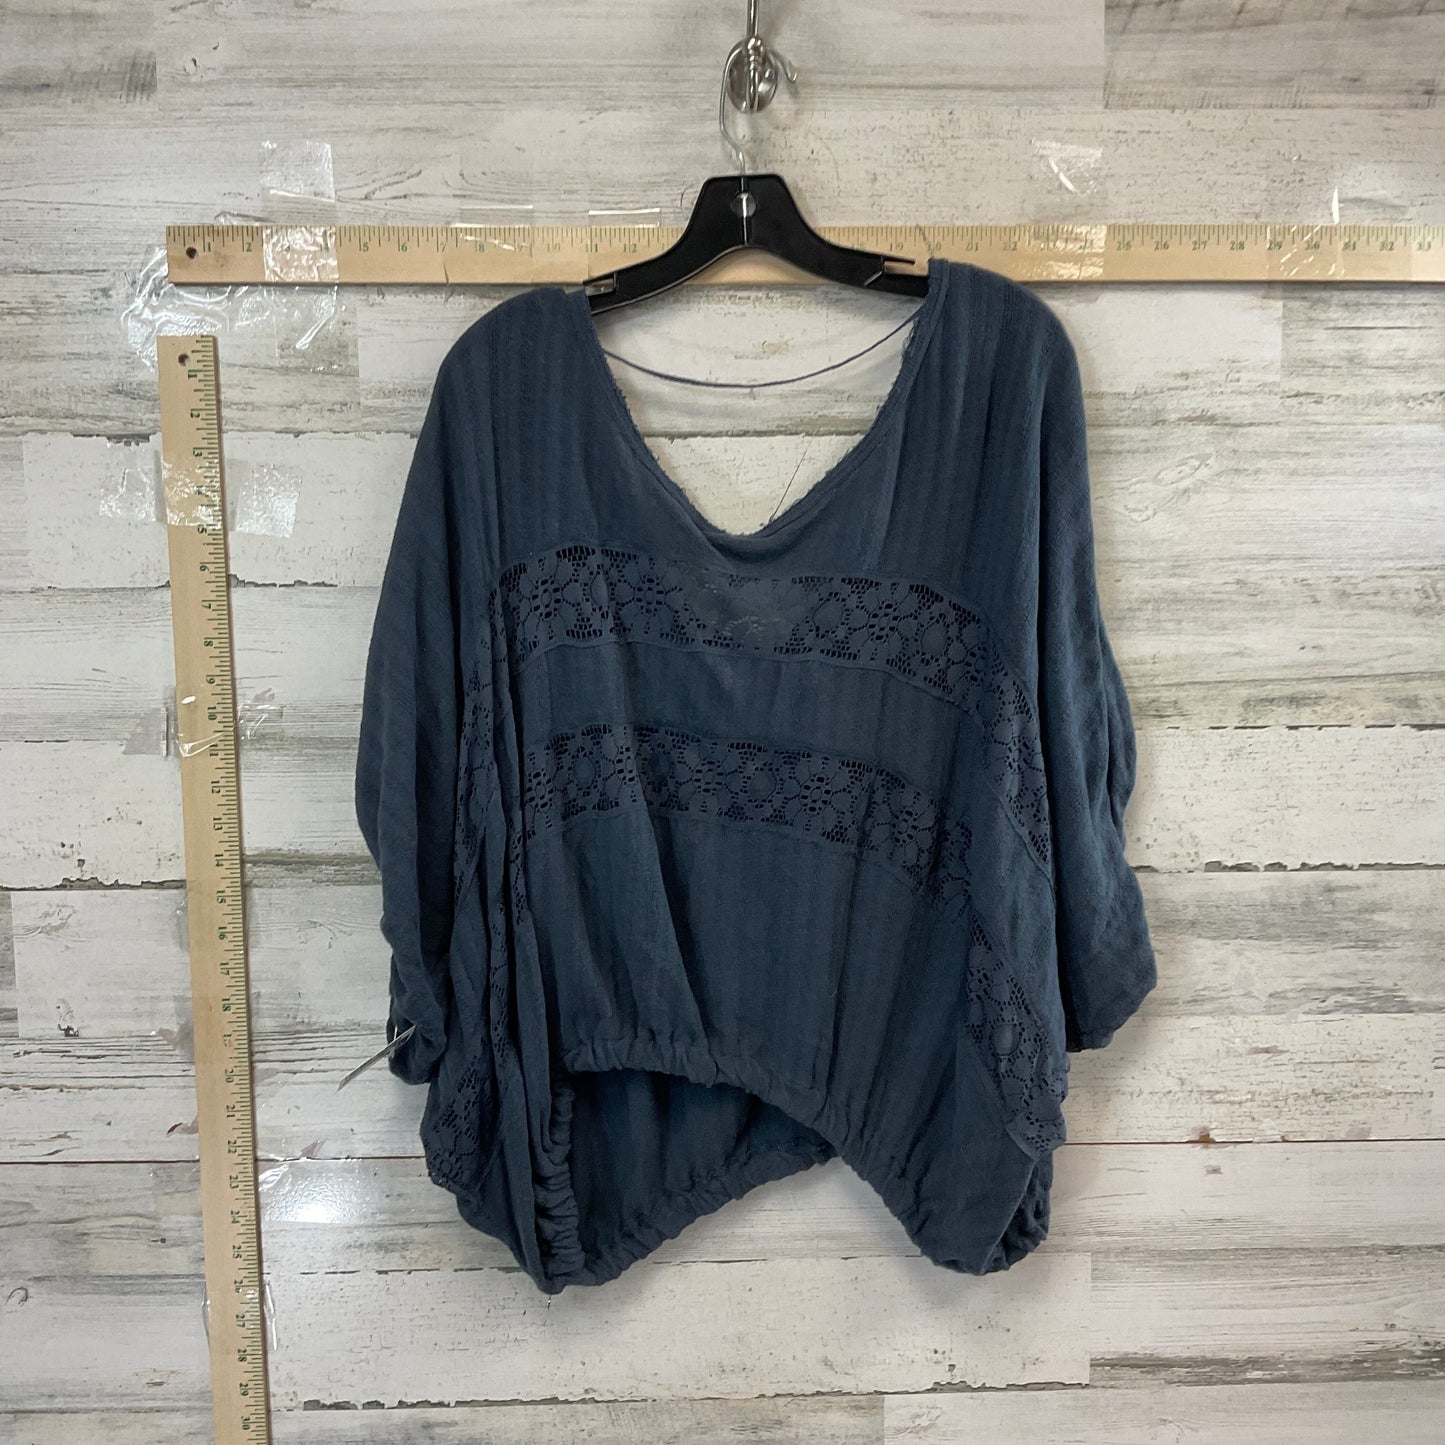 Grey Top Short Sleeve Free People, Size M